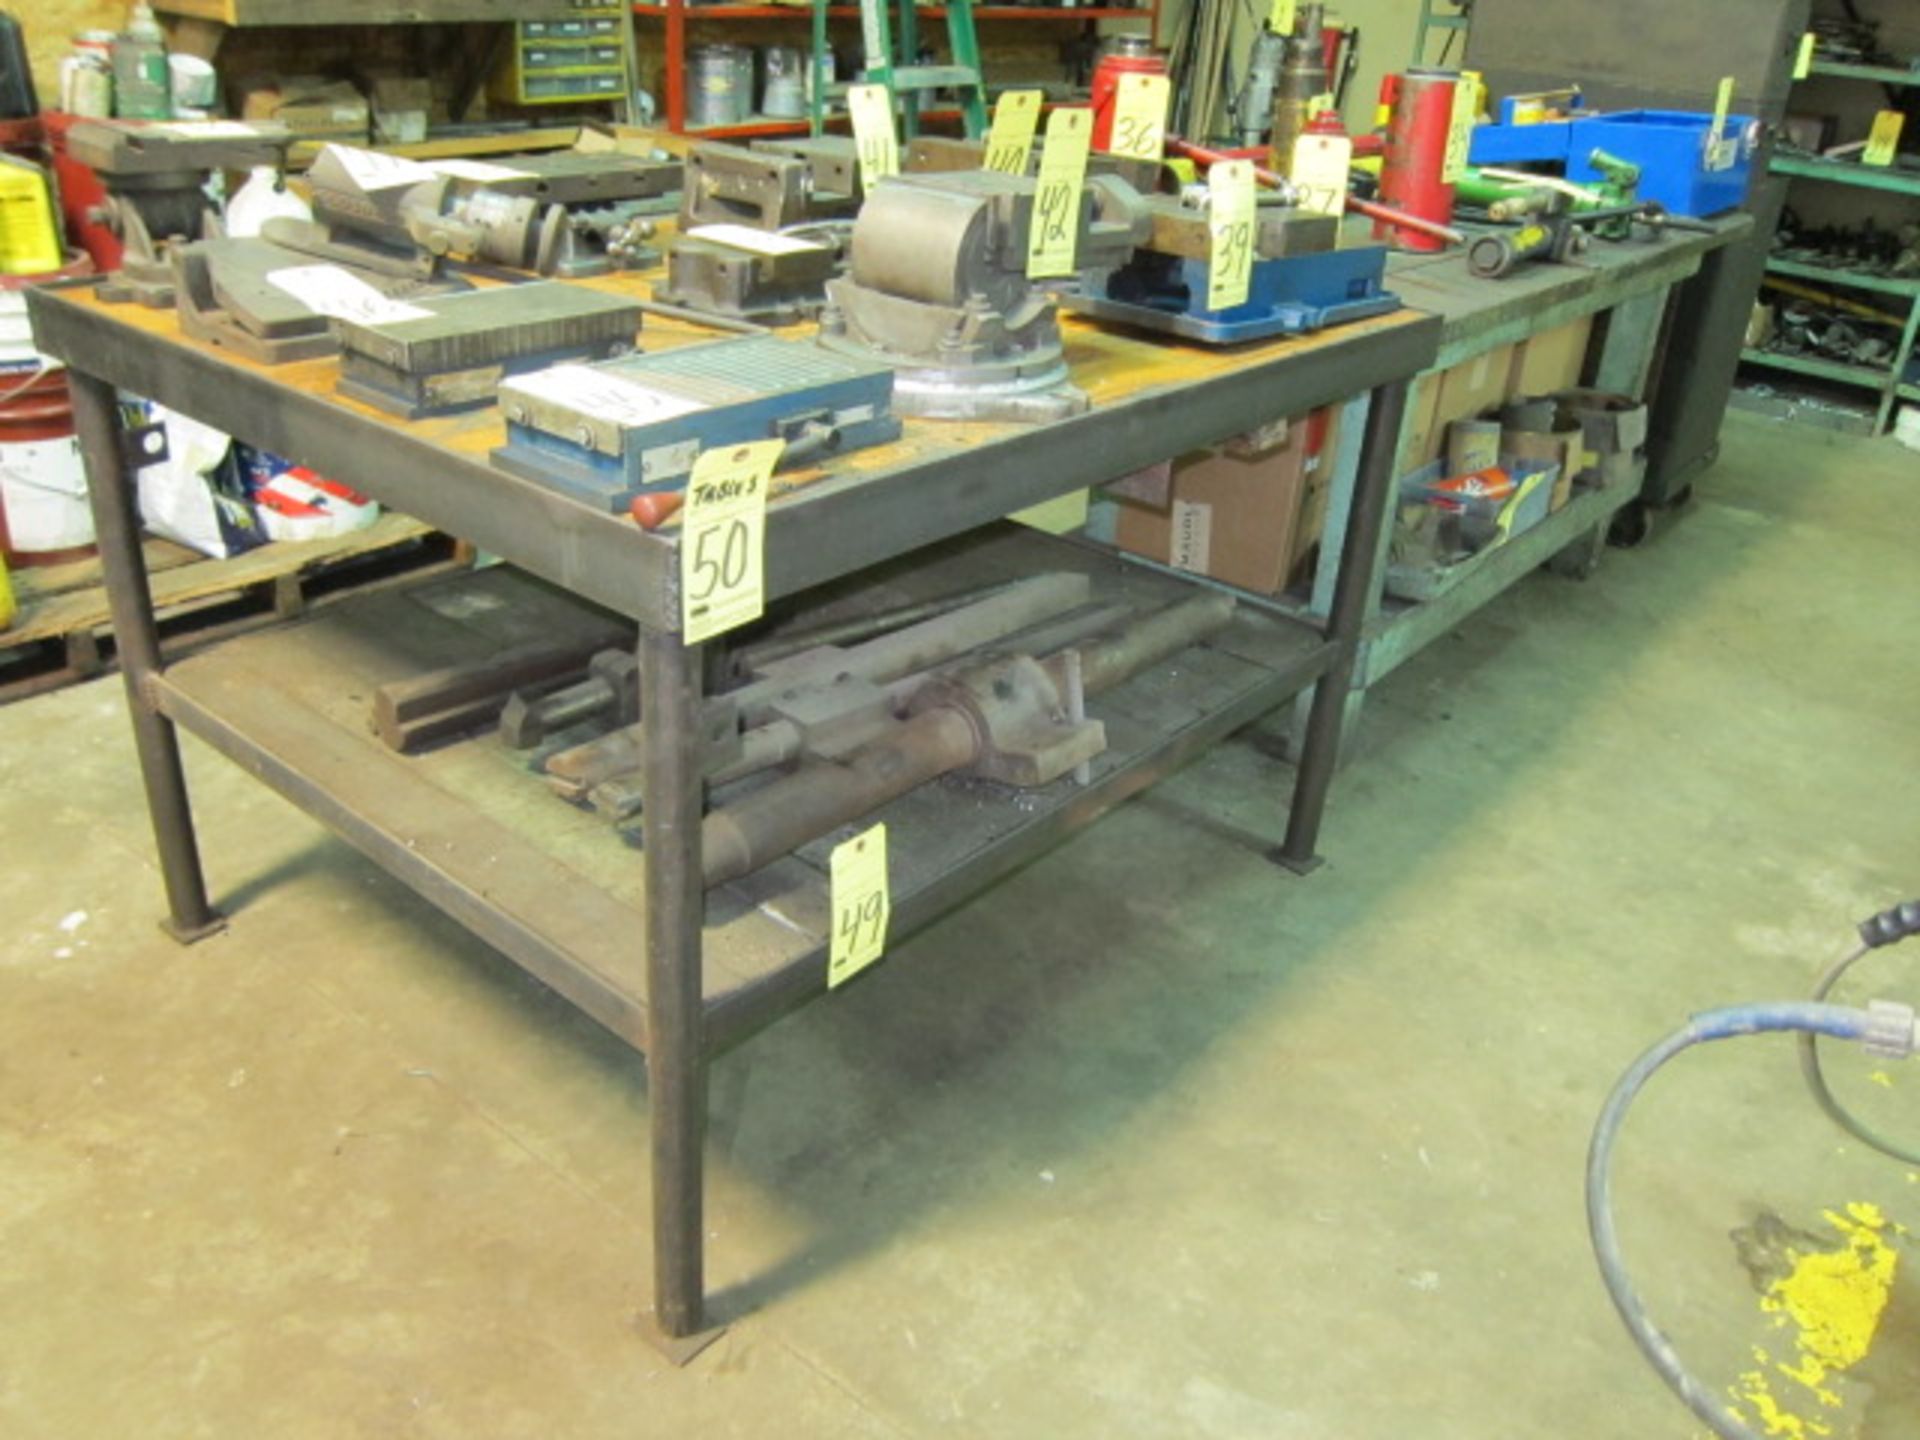 LOT OF WORKBENCHES (2), assorted